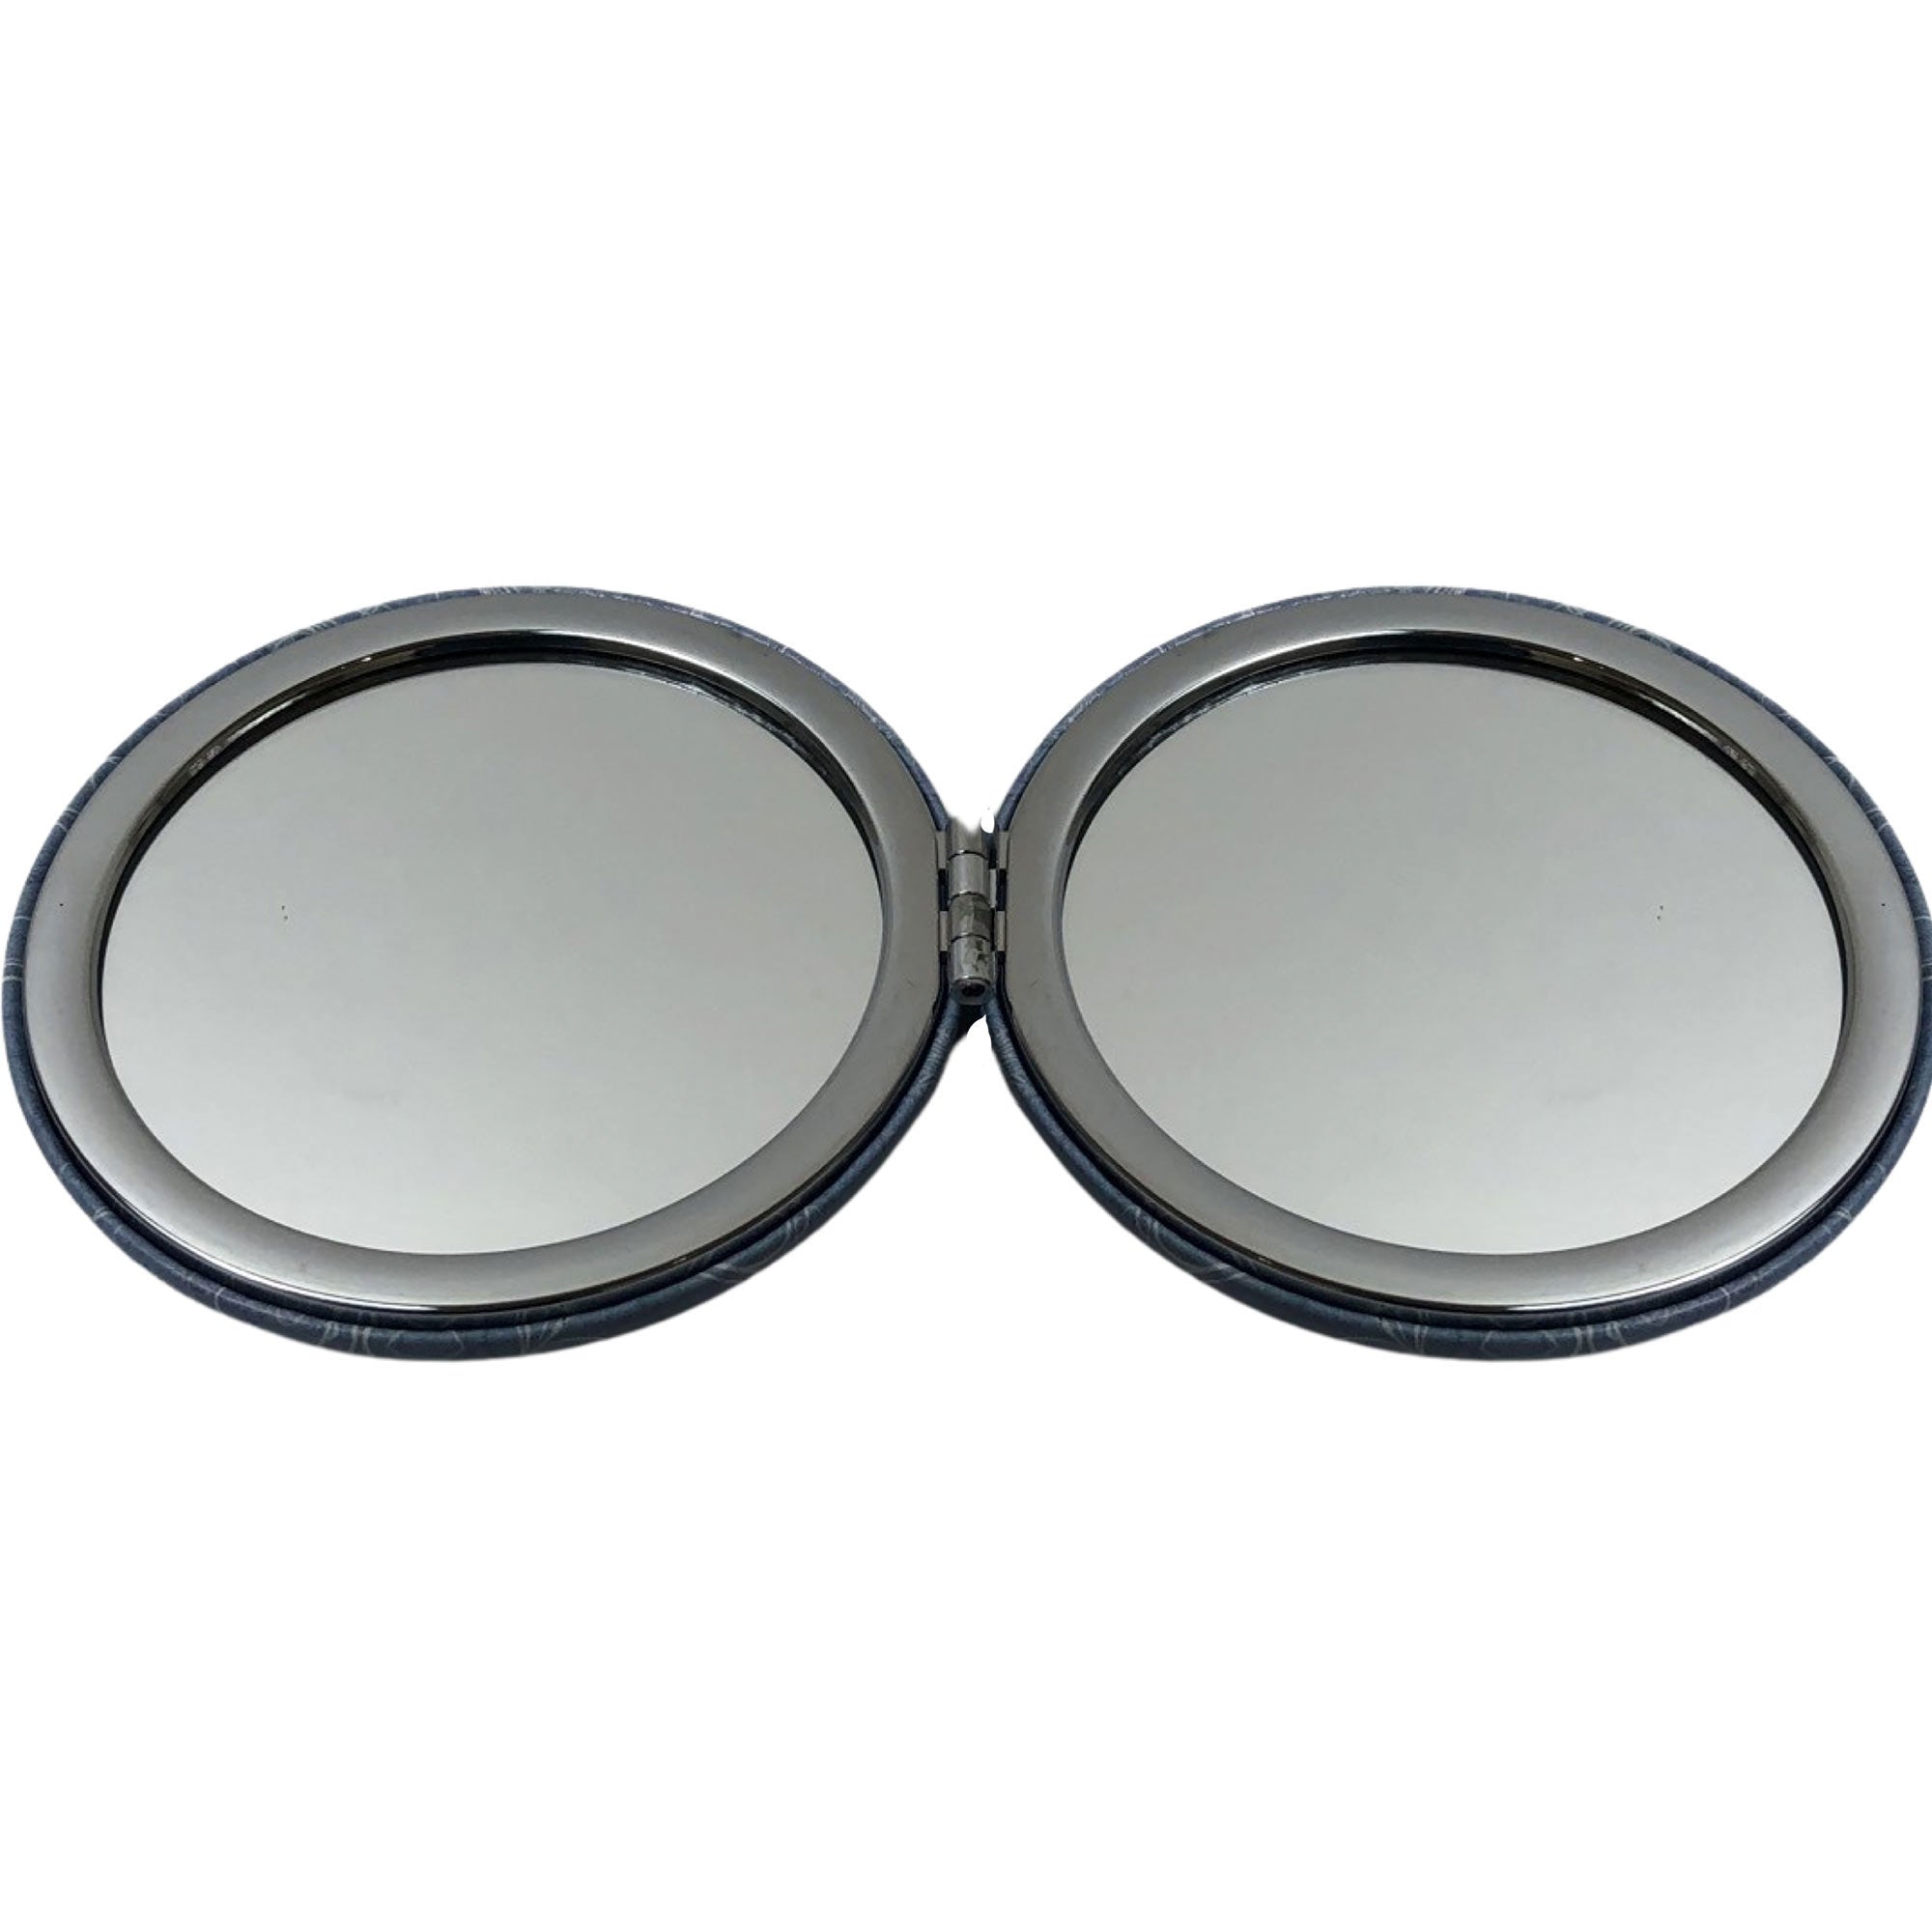 CLEARANCE COSMETIC MIRRORS NATIONAL PRINTS (CASE OF 48 - $1.50 / PIECE)  Wholesale Round Cosmetic Mirrors in Assorted Prints SKU: 906-NATIONAL-48